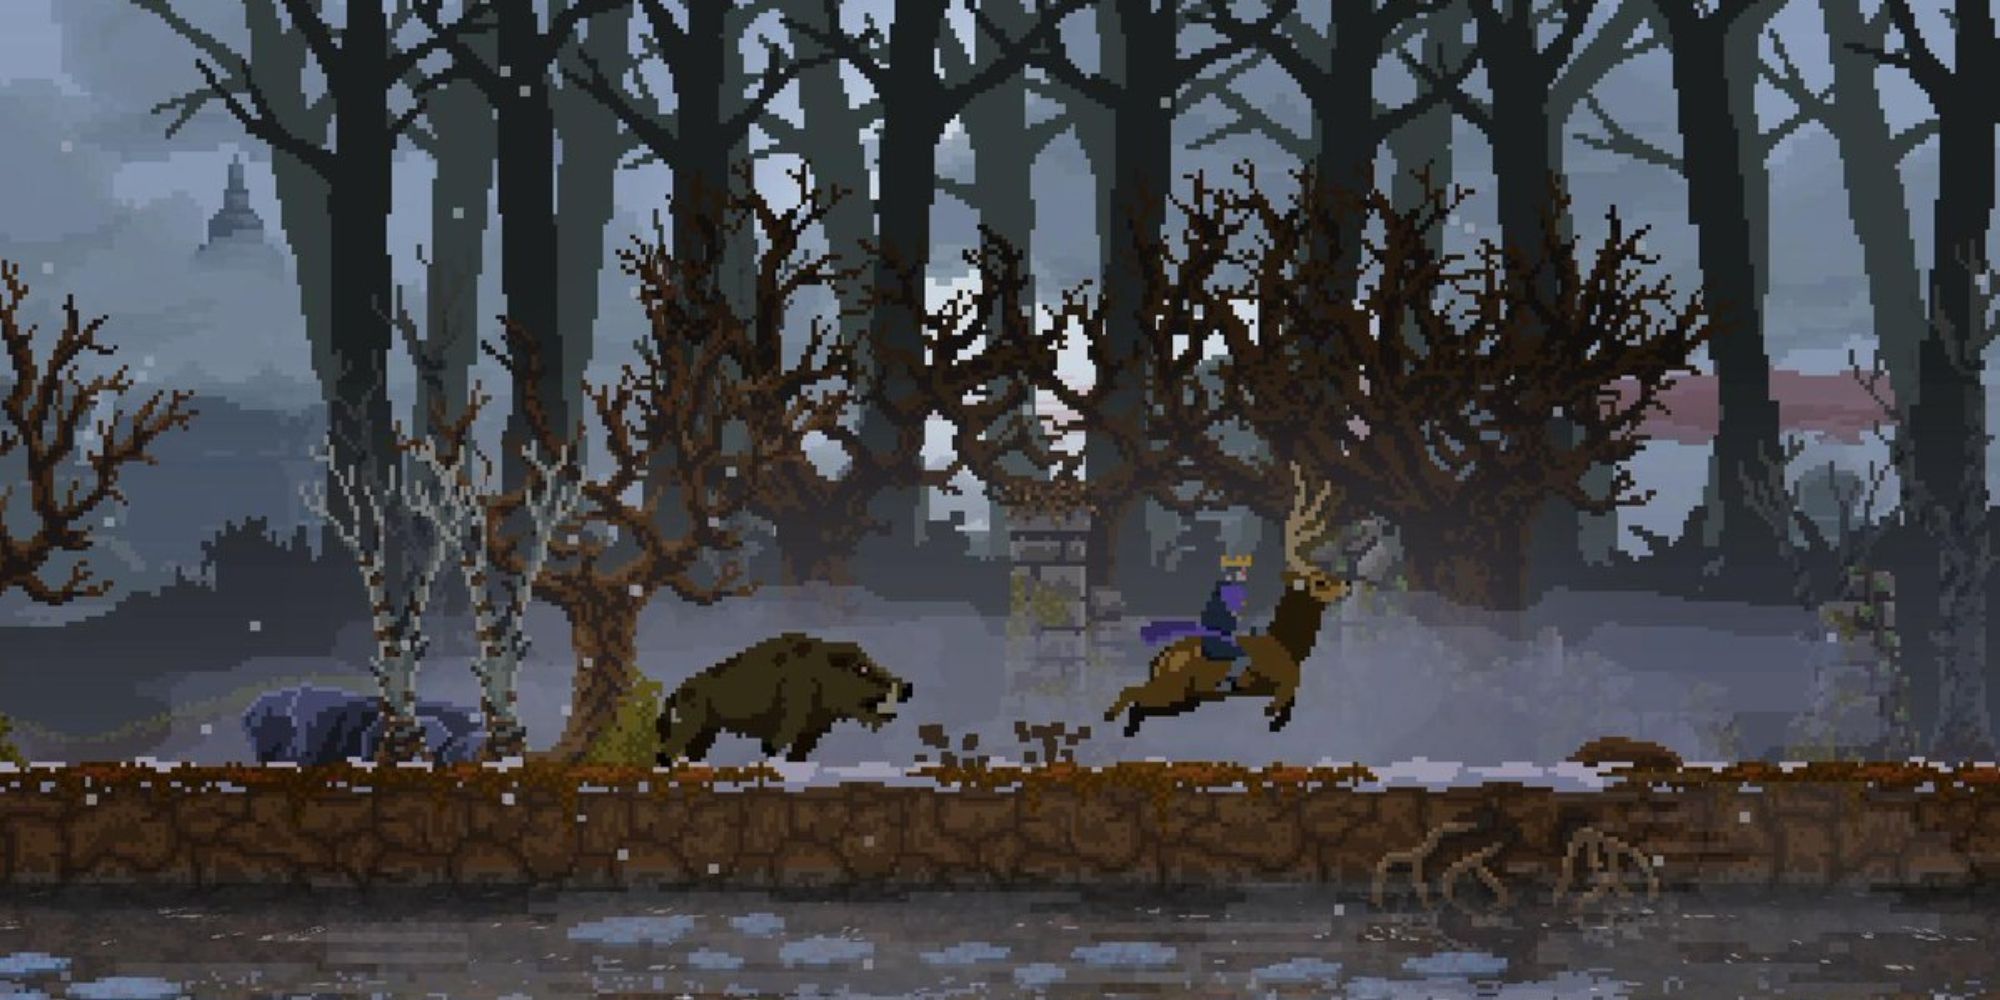 A Boar Chasing The Player In Kingdom Two Crowns